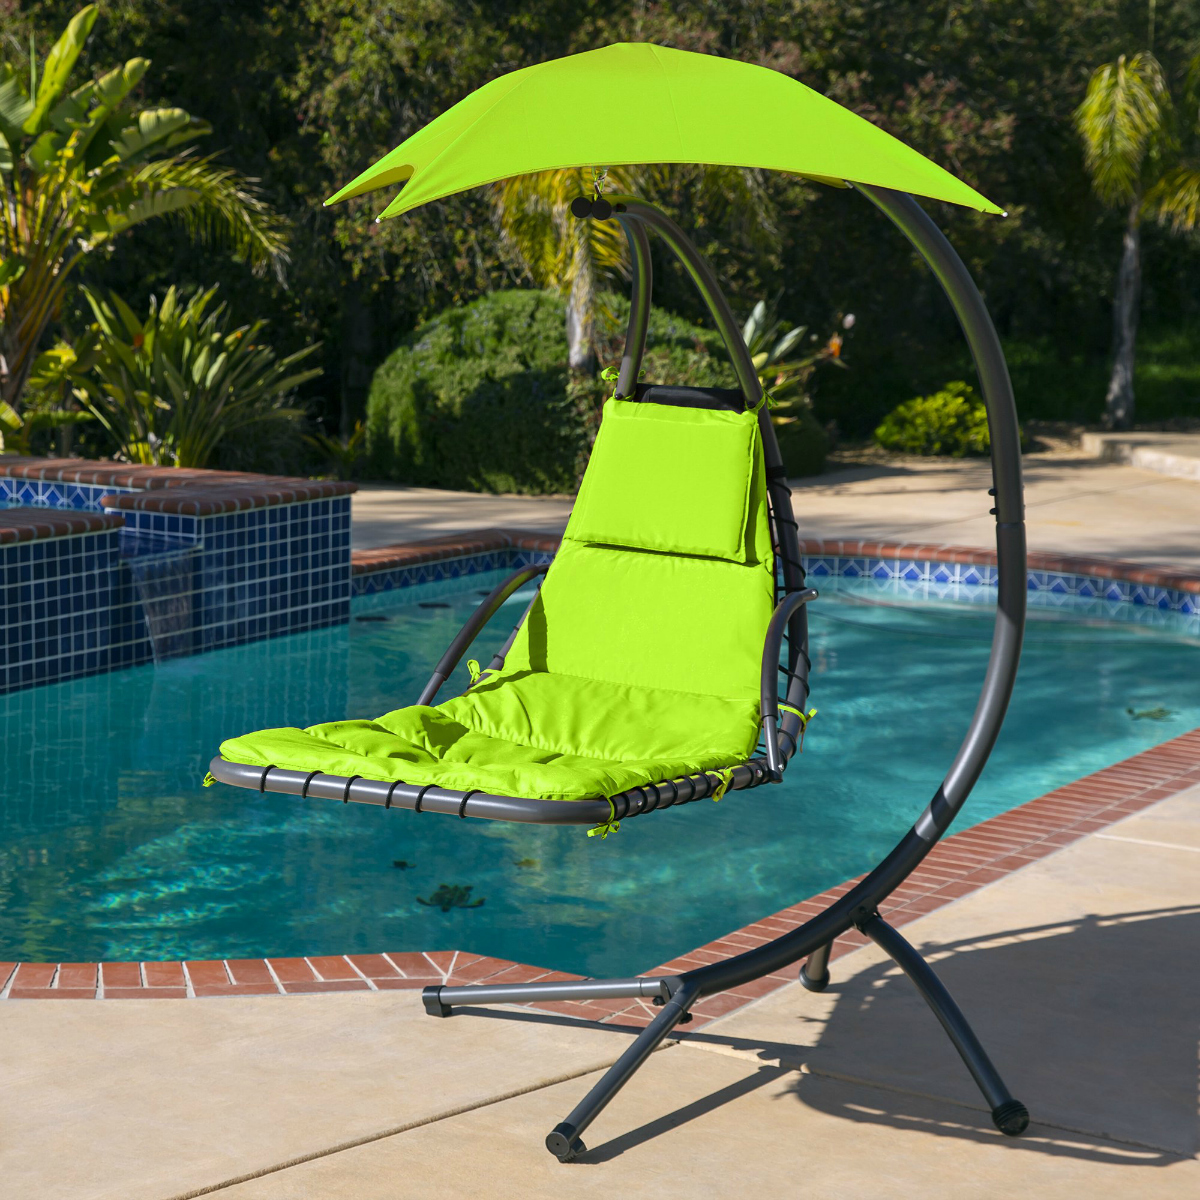 Hanging Chaise Lounge Chair deal